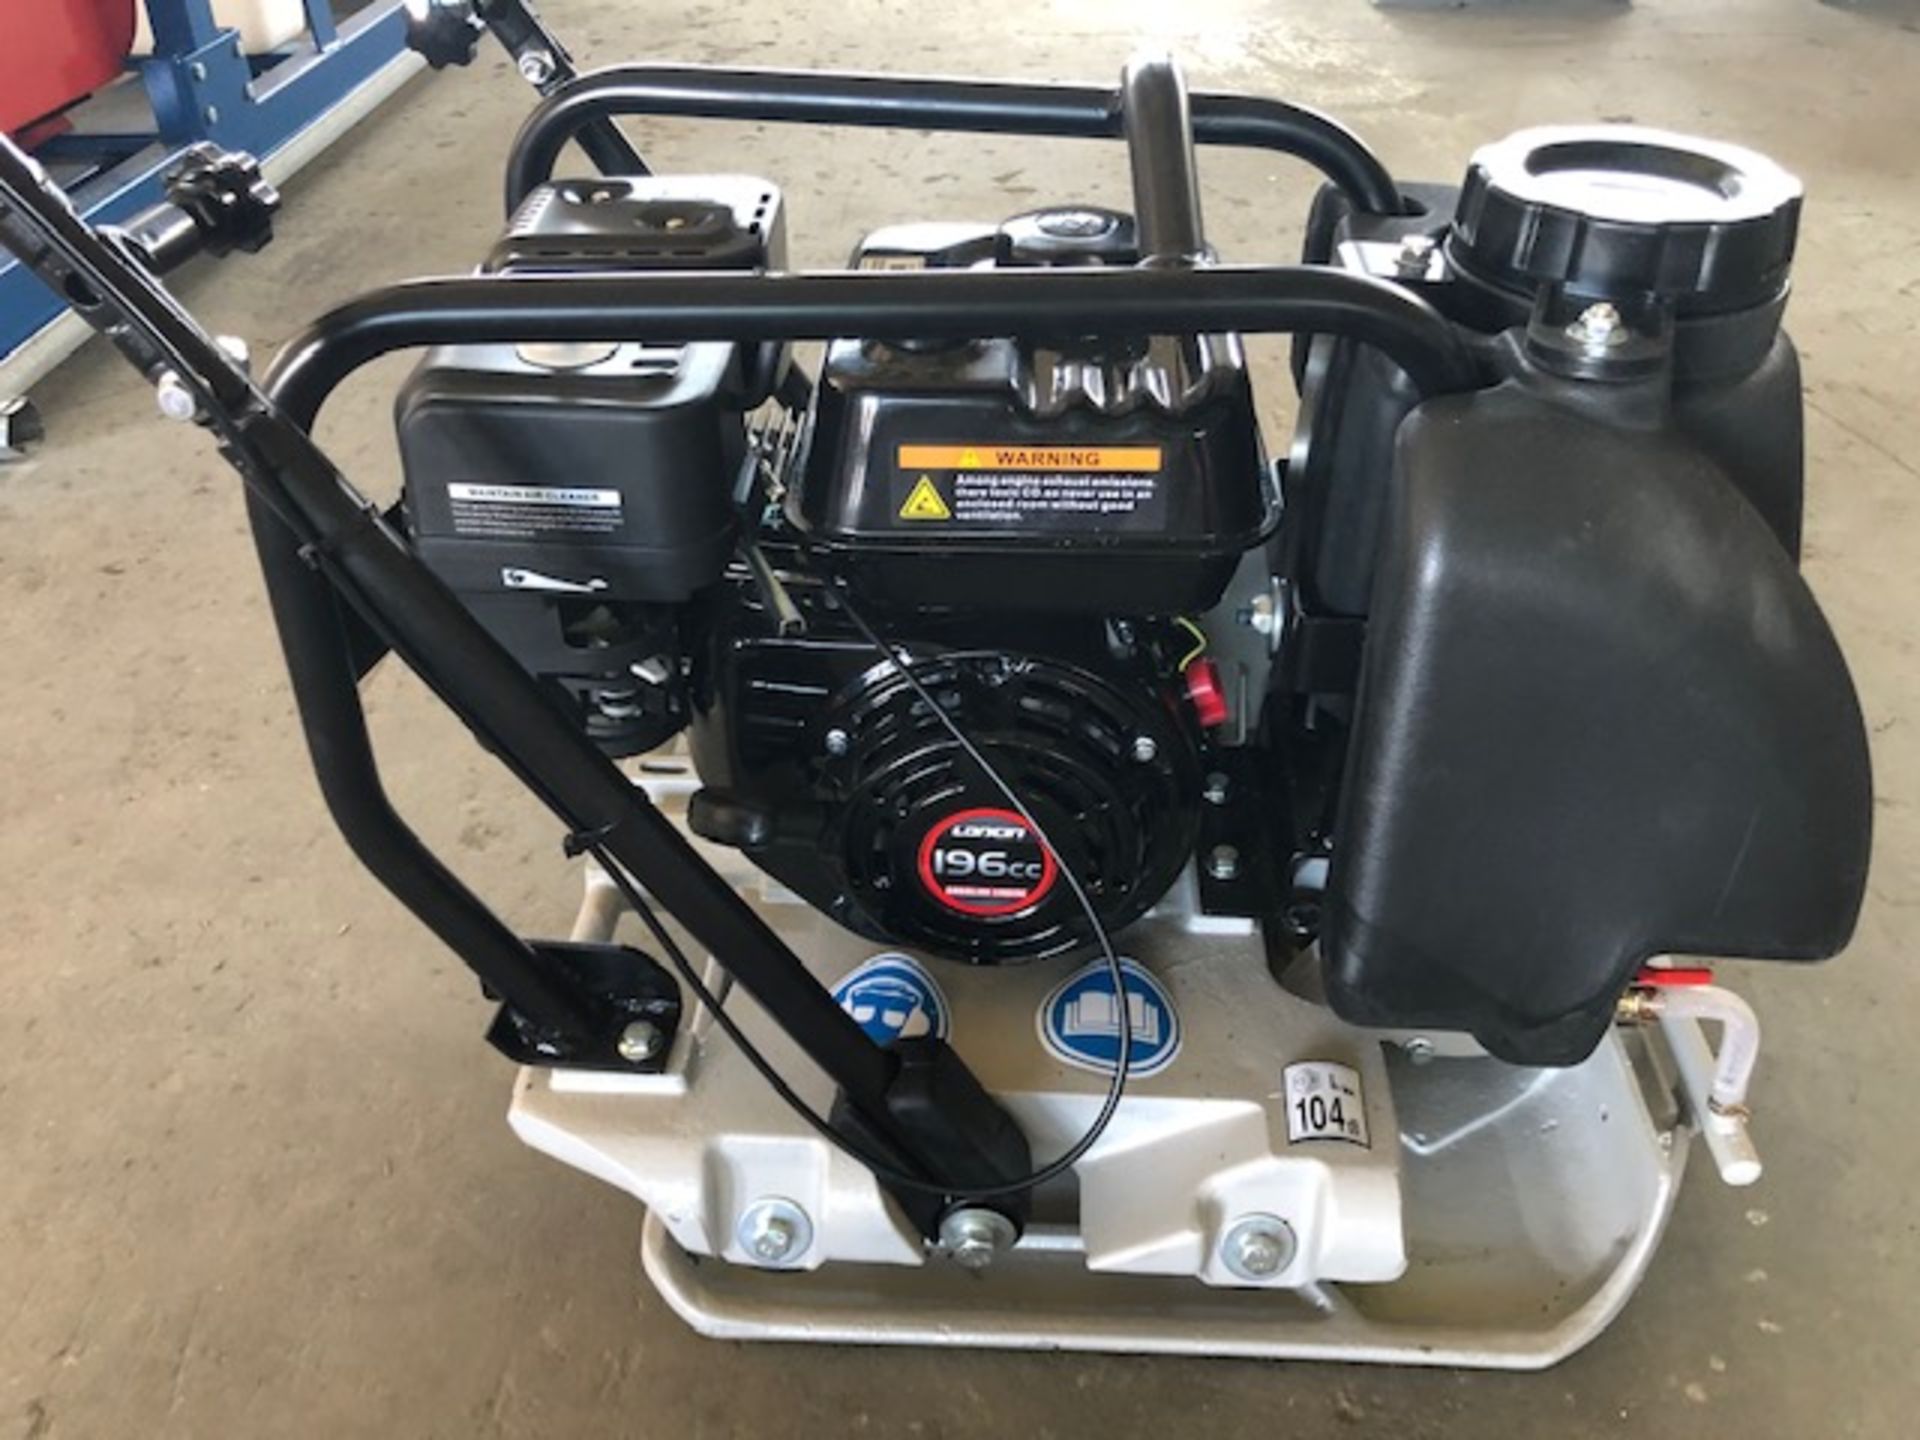 2020 Mustang LF88 Plate Compactor - Image 4 of 5